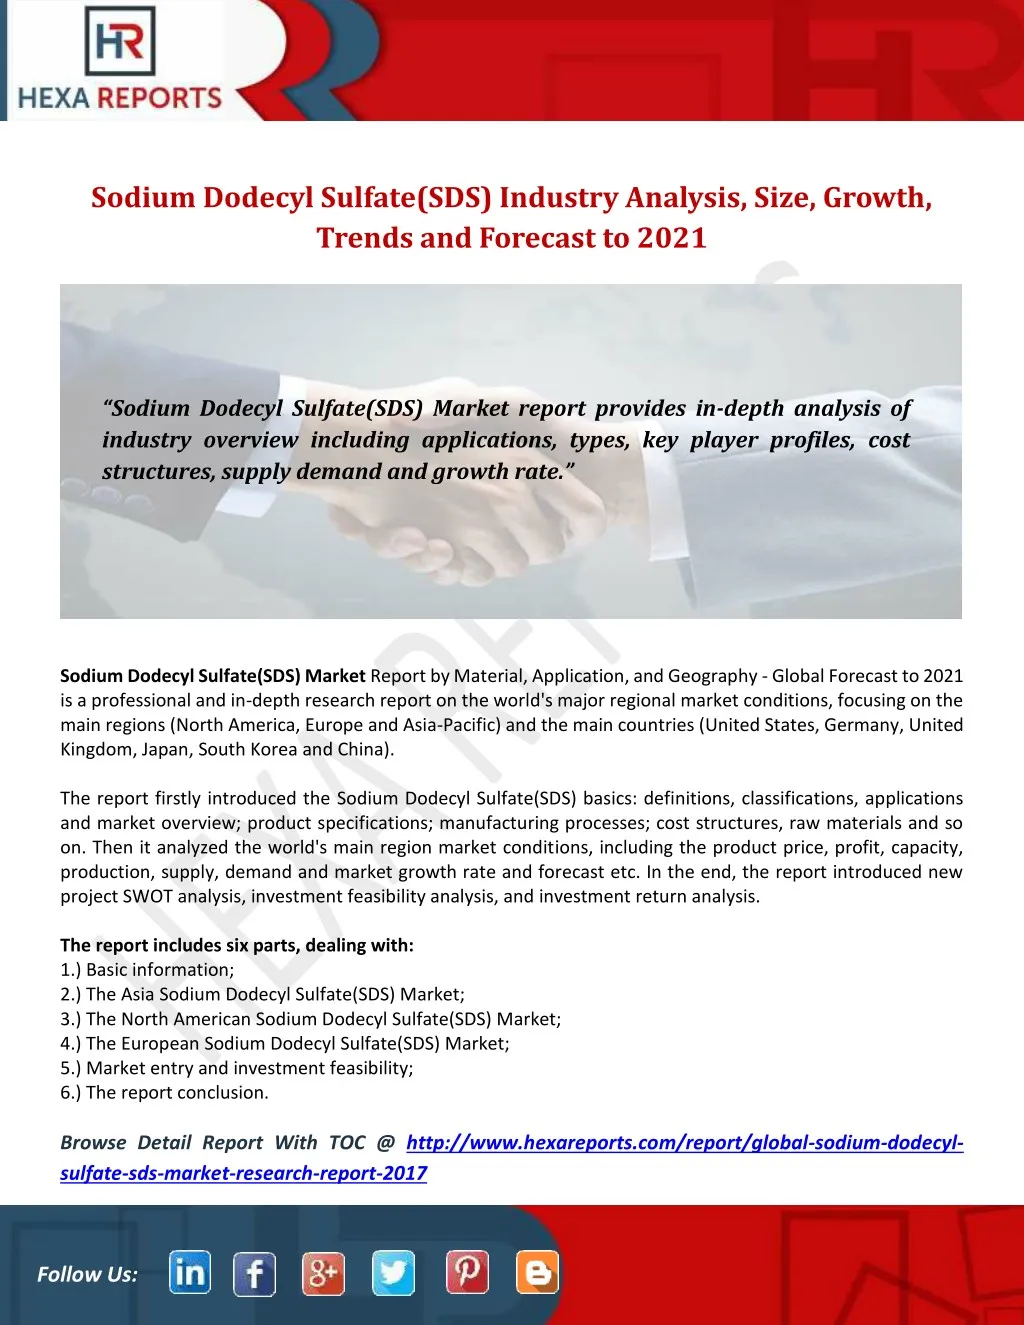 sodium dodecyl sulfate sds industry analysis size